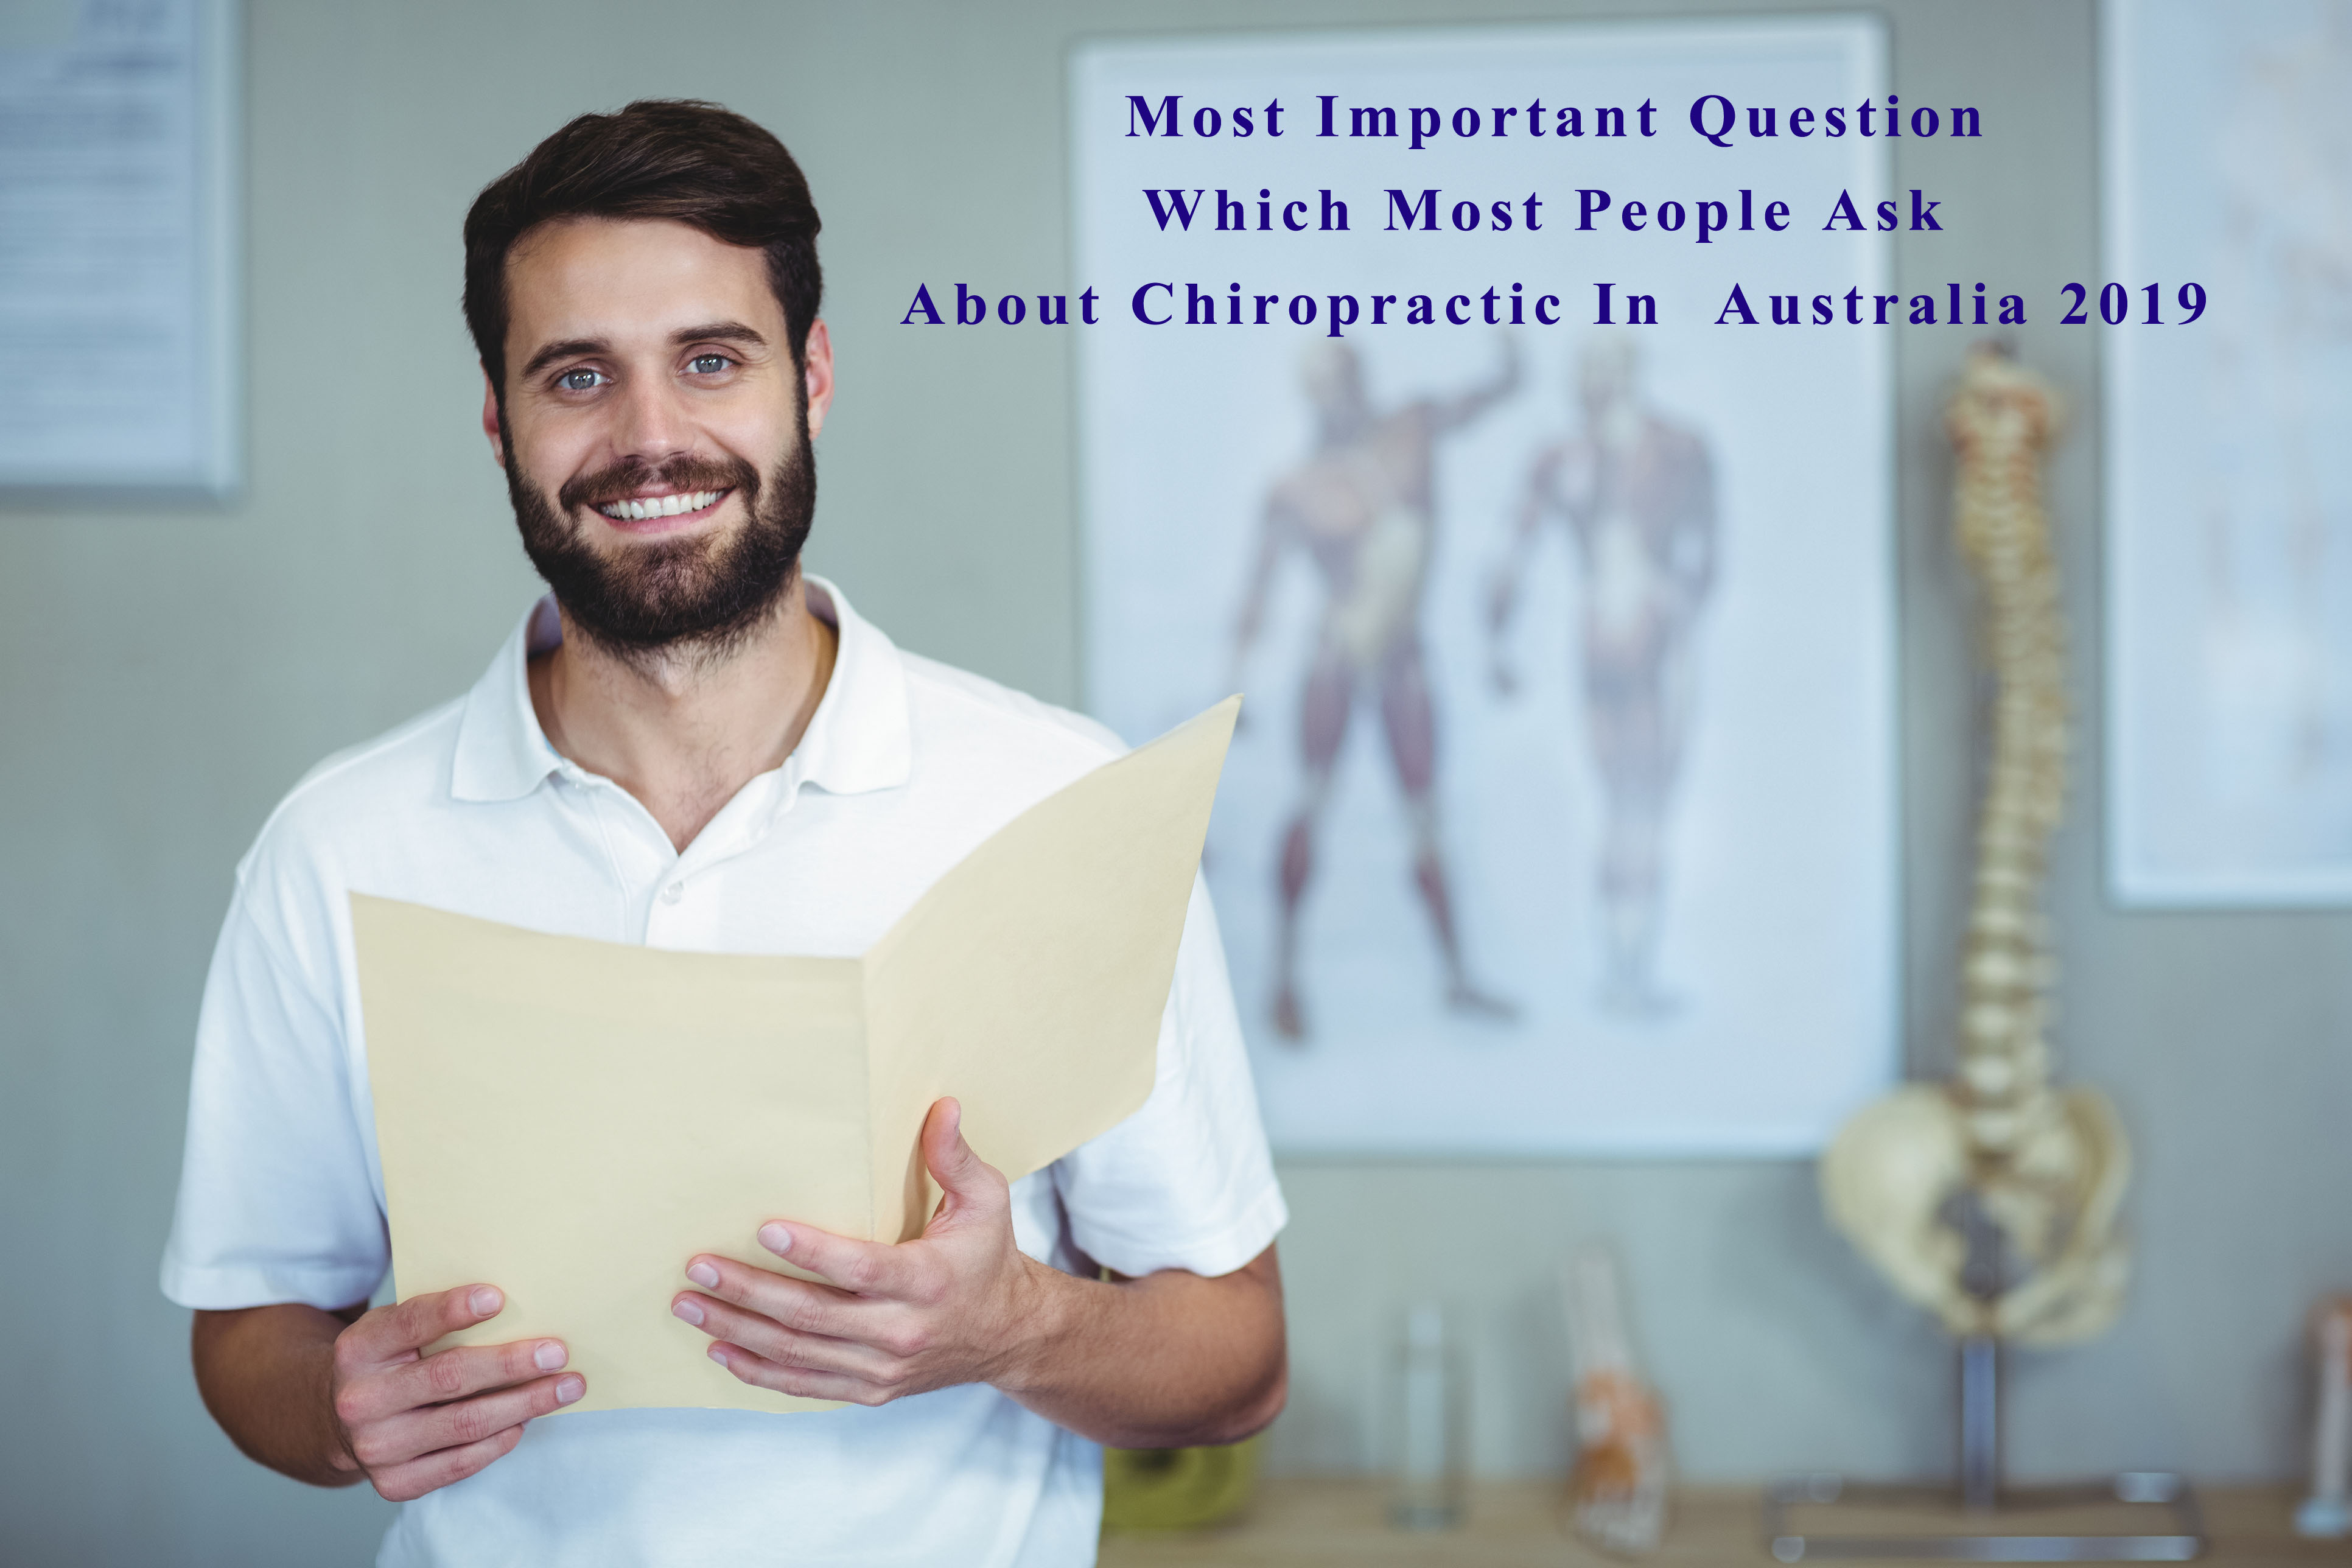 Most Important Question Which Most People Ask About Chiropractic In Australia 2019